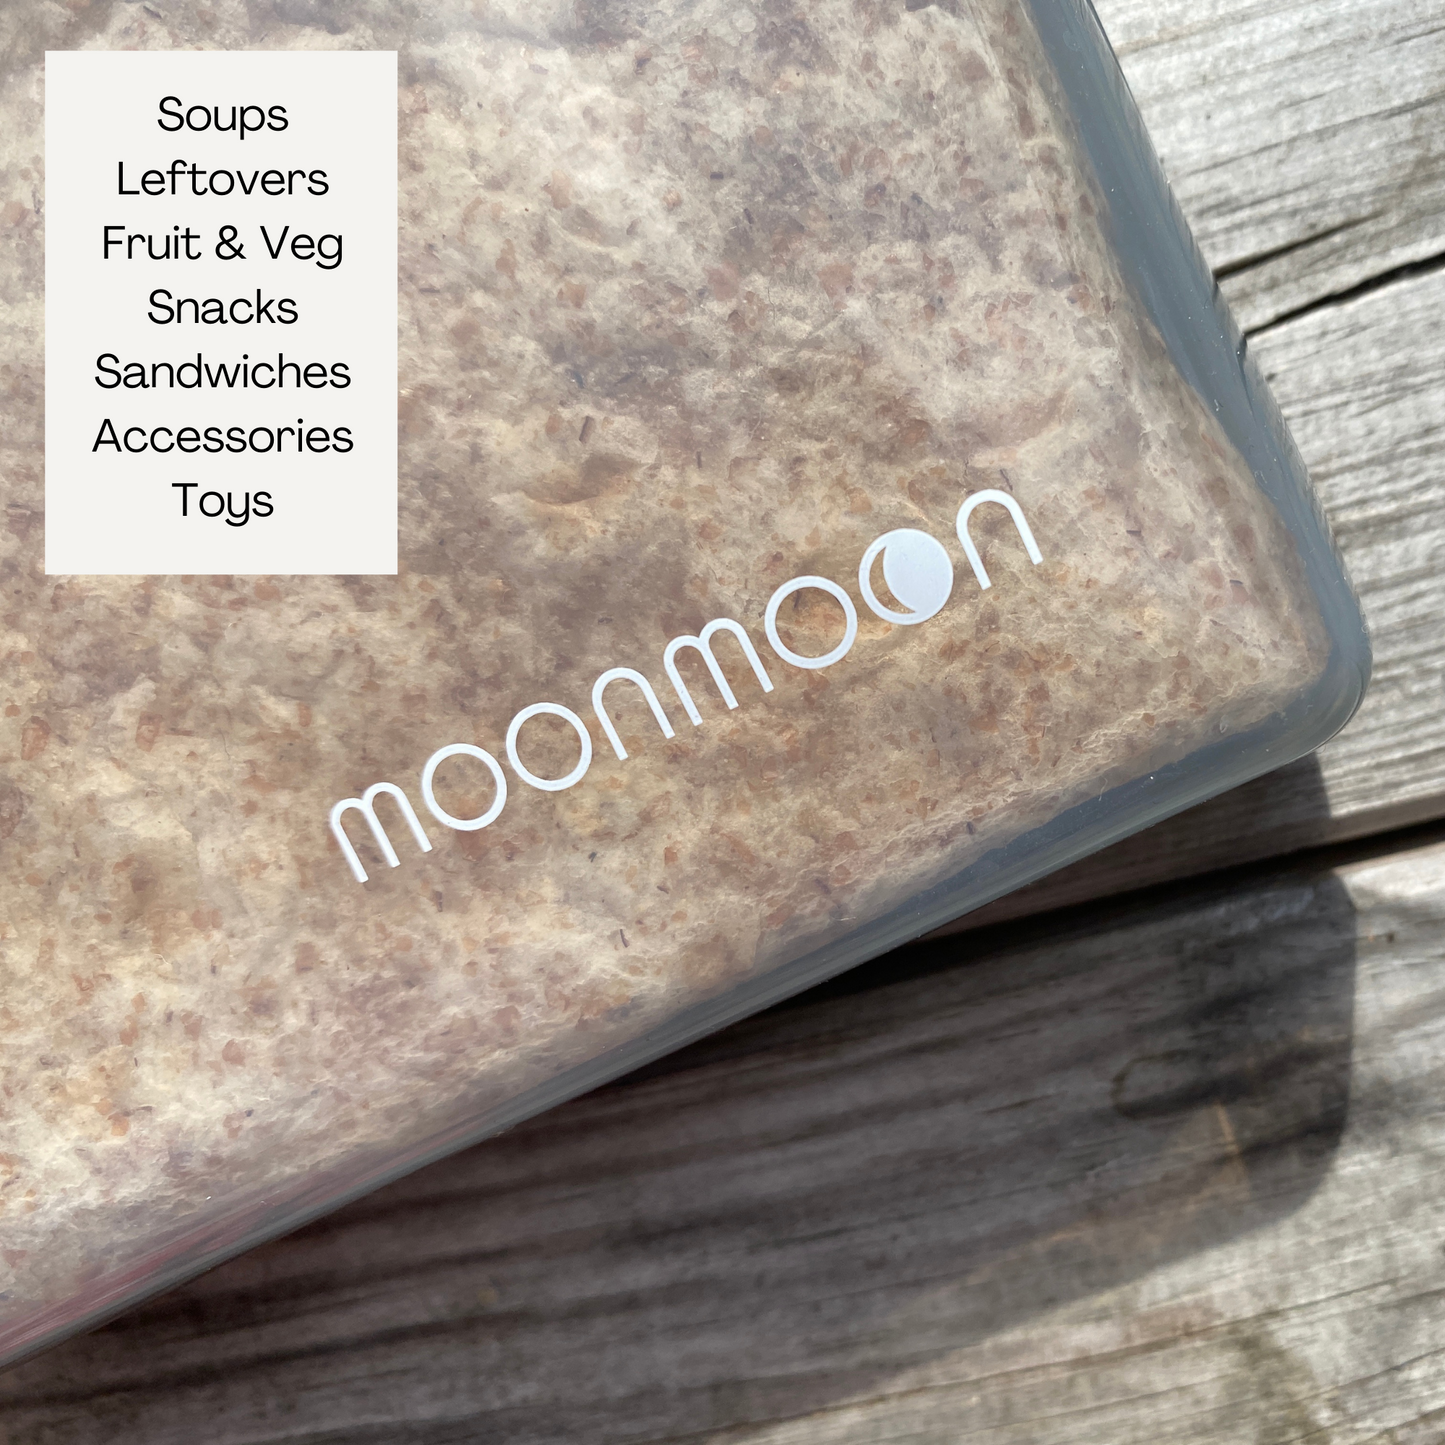 Load image into Gallery viewer, Moonmoon Silicone bags in grey, Reusable storage bags, reusable silicone food bags uk reusable silicone freezer bags uk stasher silicone bags silicone bags for food reusable silicone food bags
